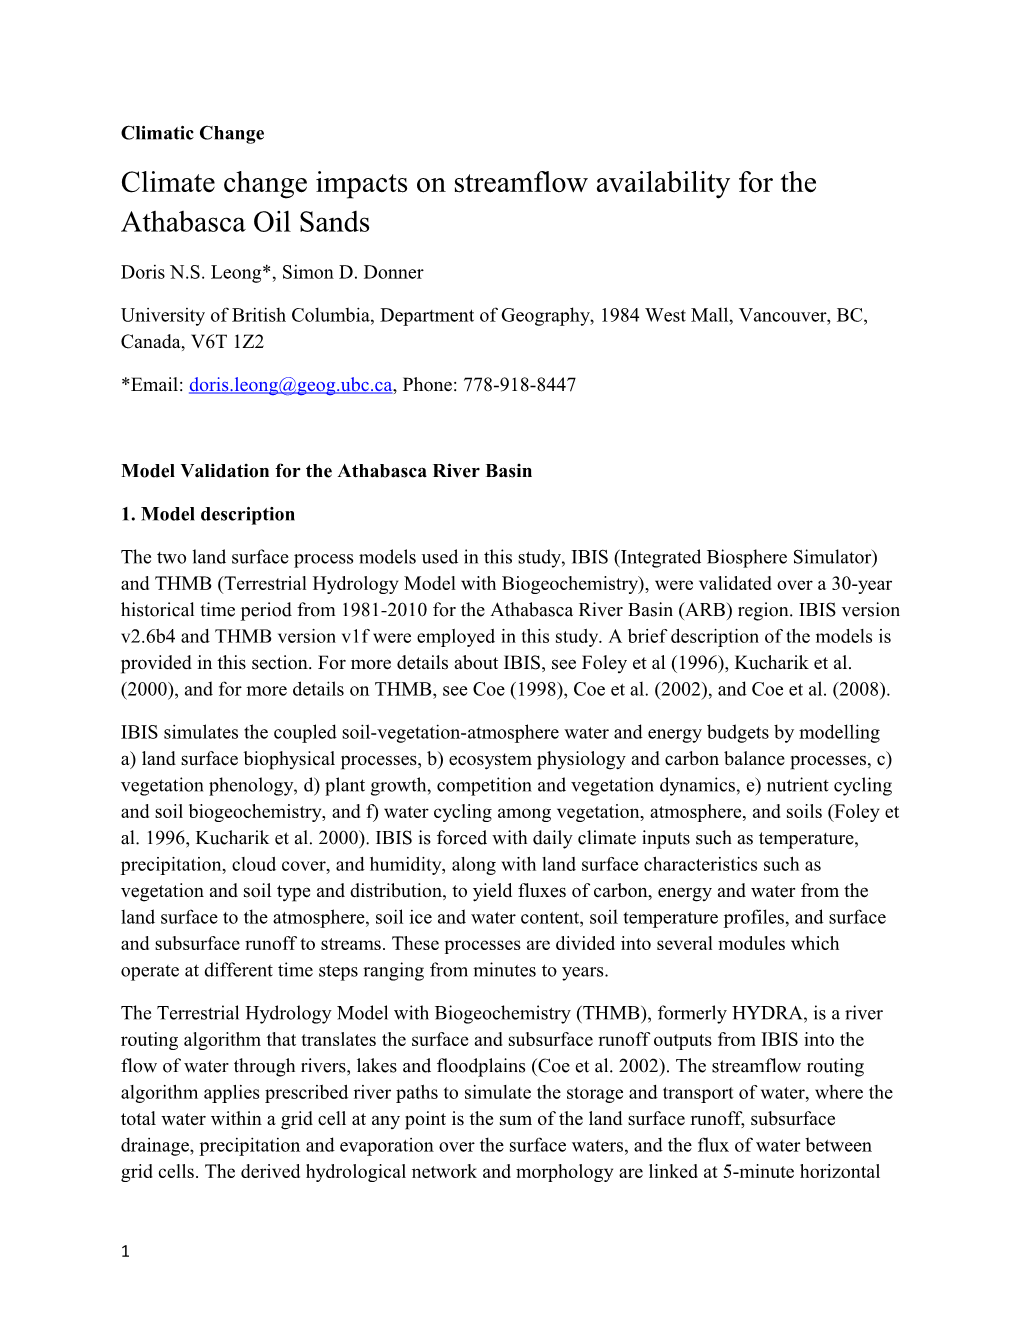 Climate Change Impacts on Streamflow Availability for the Athabasca Oil Sands